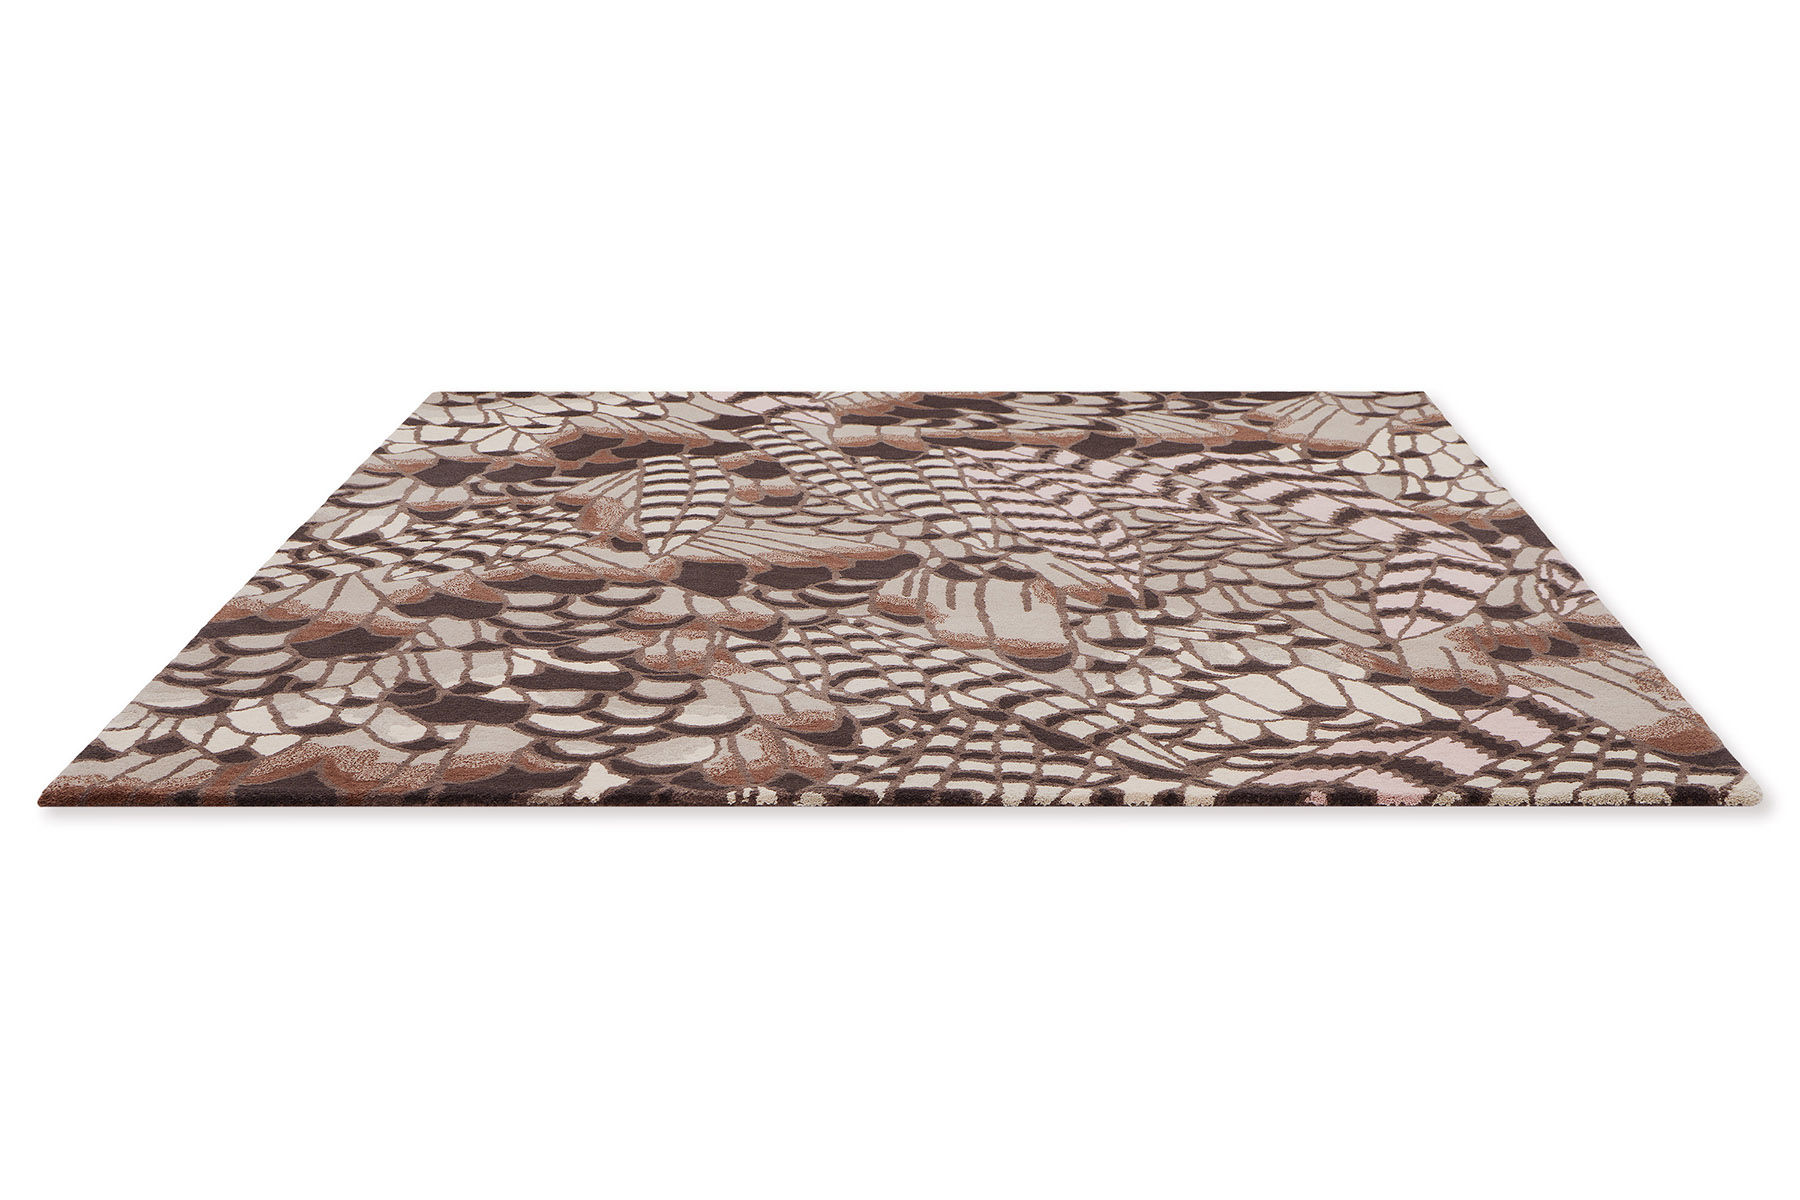 Feathers Natural Designer Rug ☞ Size: 6' 7" x 9' 2" (200 x 280 cm)